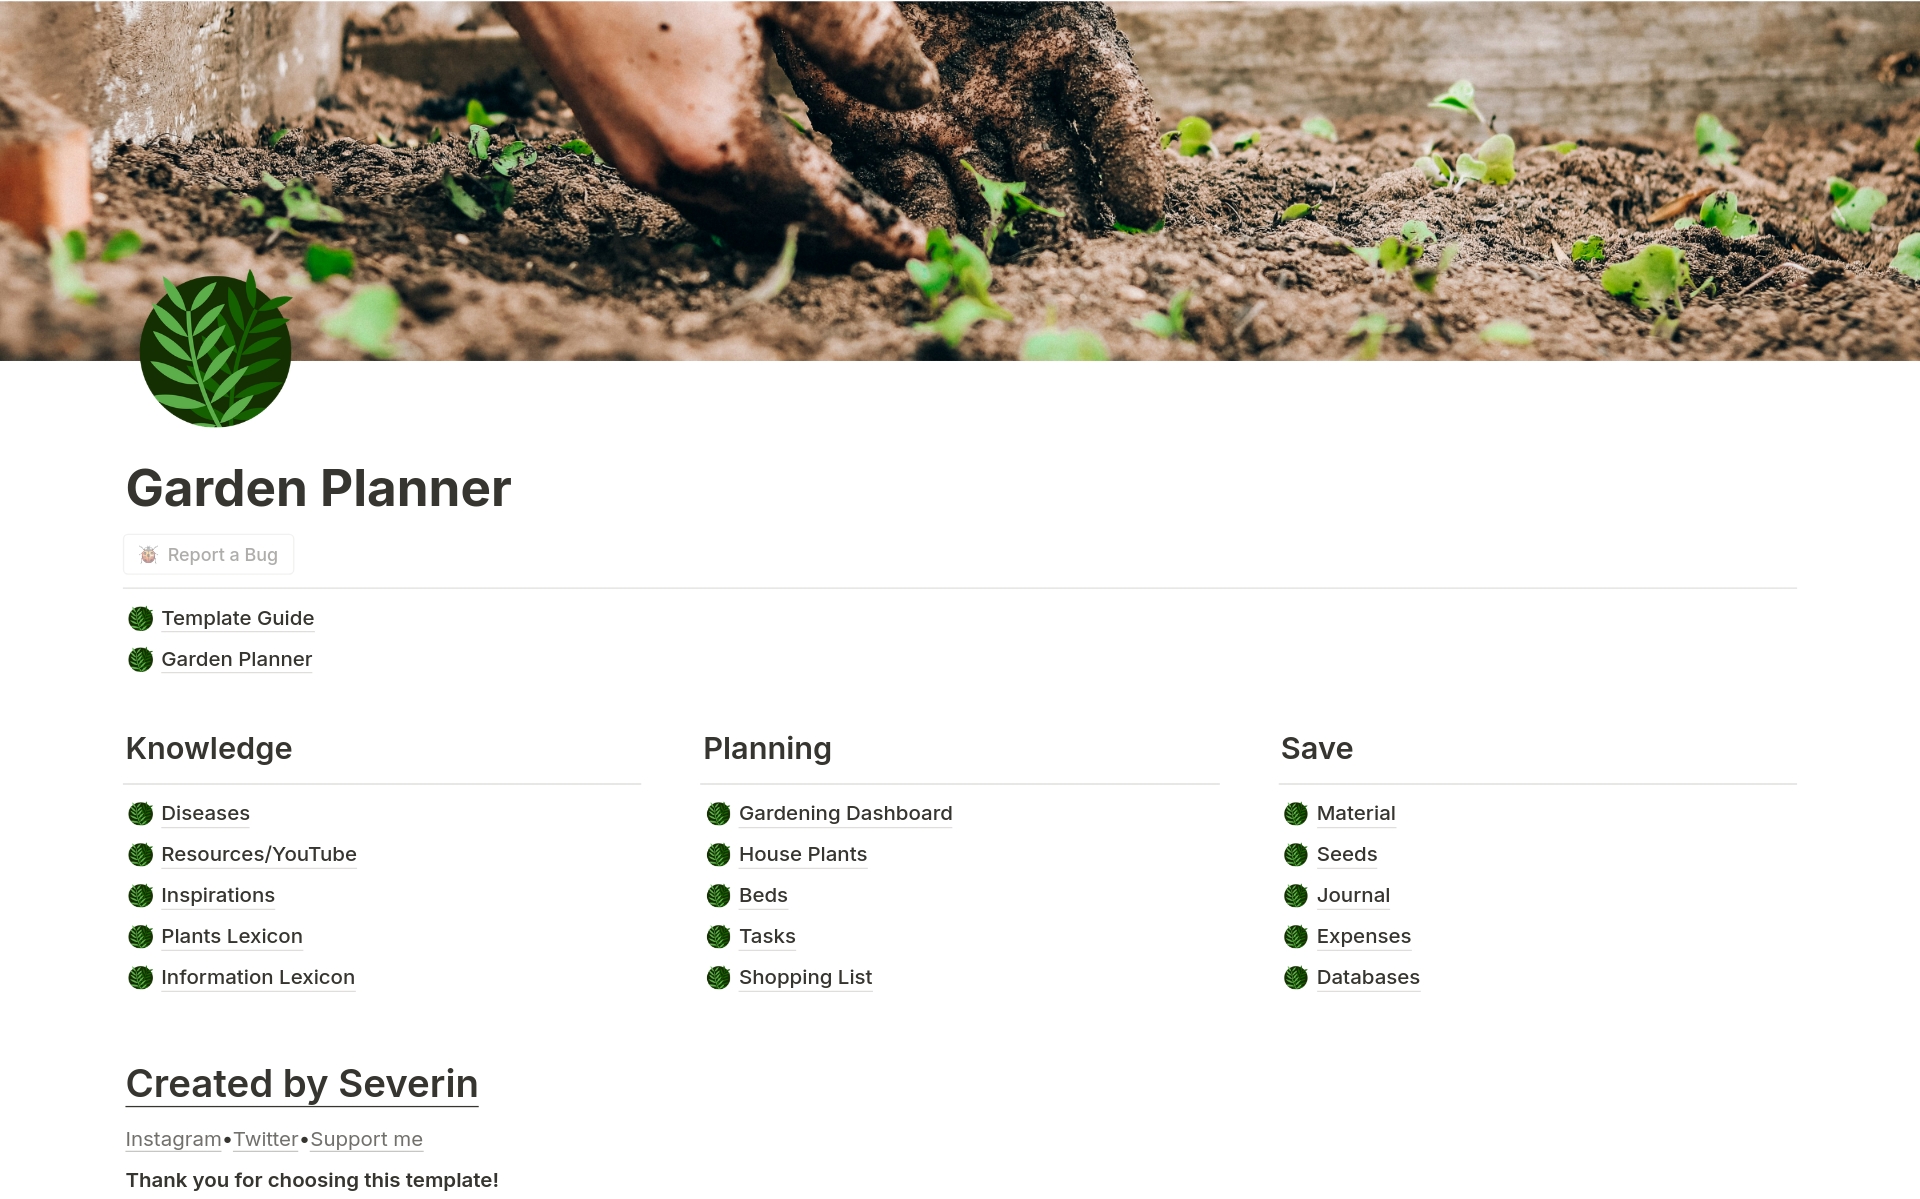 Maximize your garden's potential with an all-in-one tool that simplifies garden planning, tracks progress, and provides a comprehensive knowledge database for successful gardening.